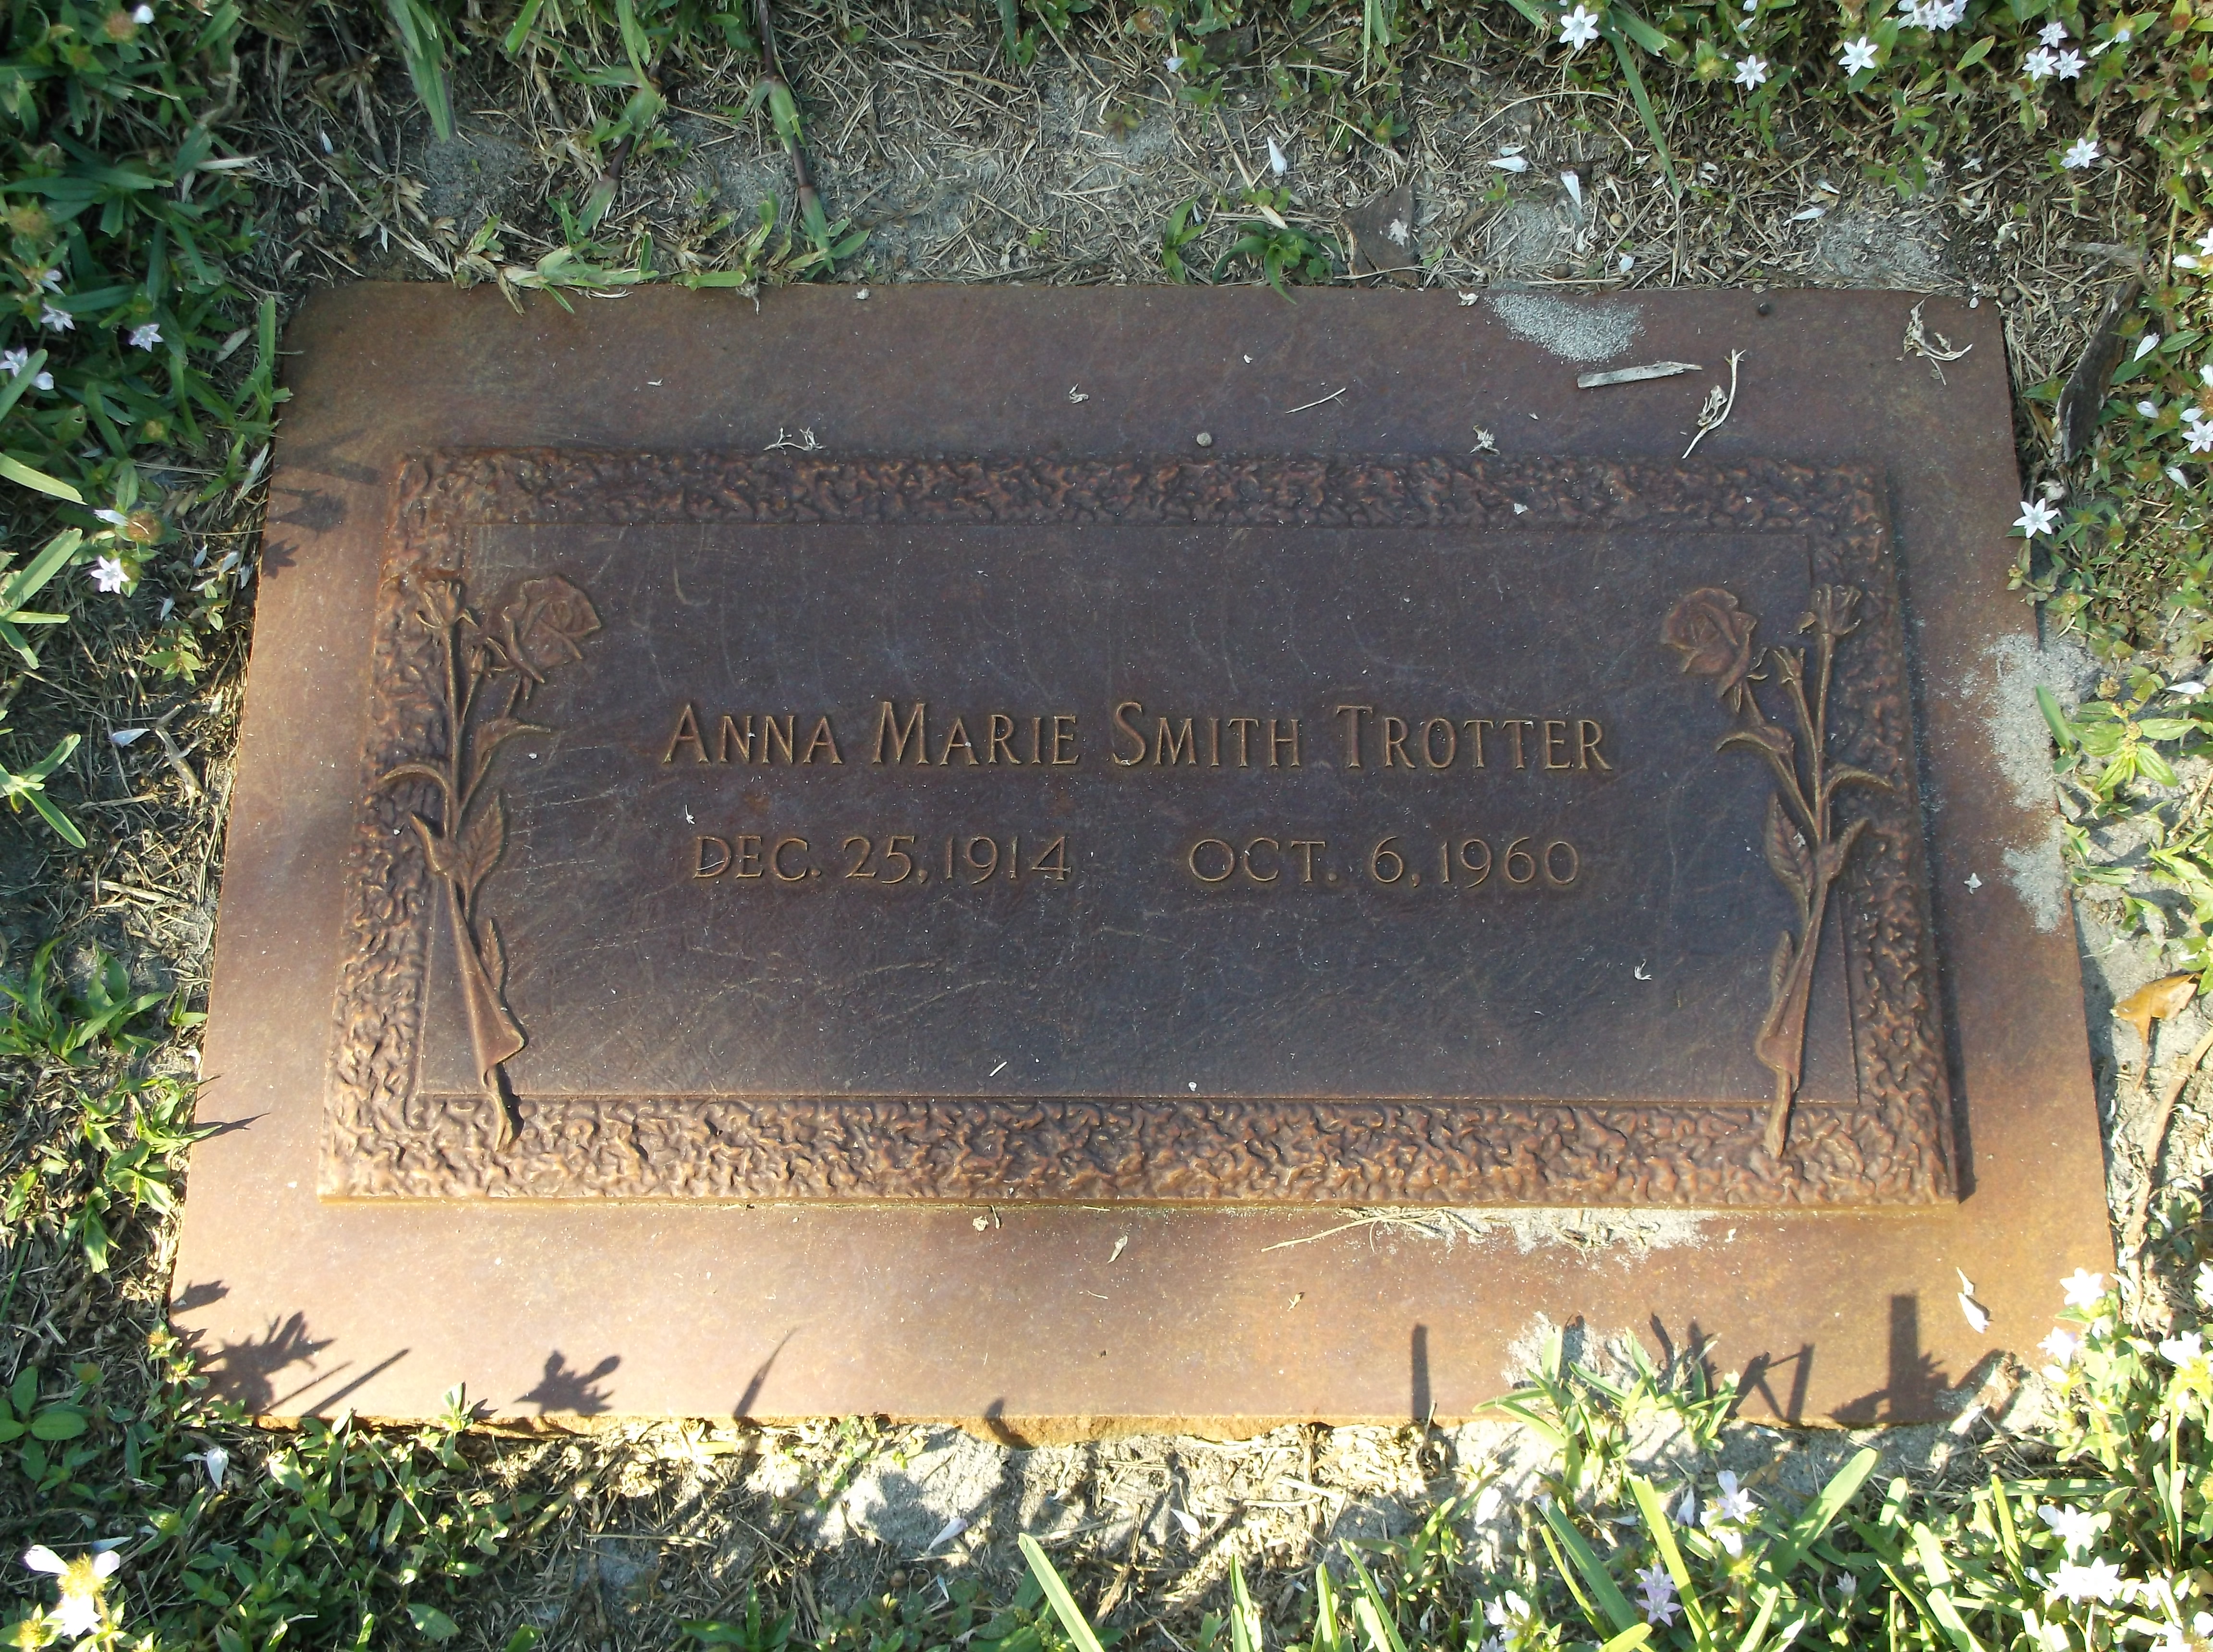 Anna Marie Smith Trotter